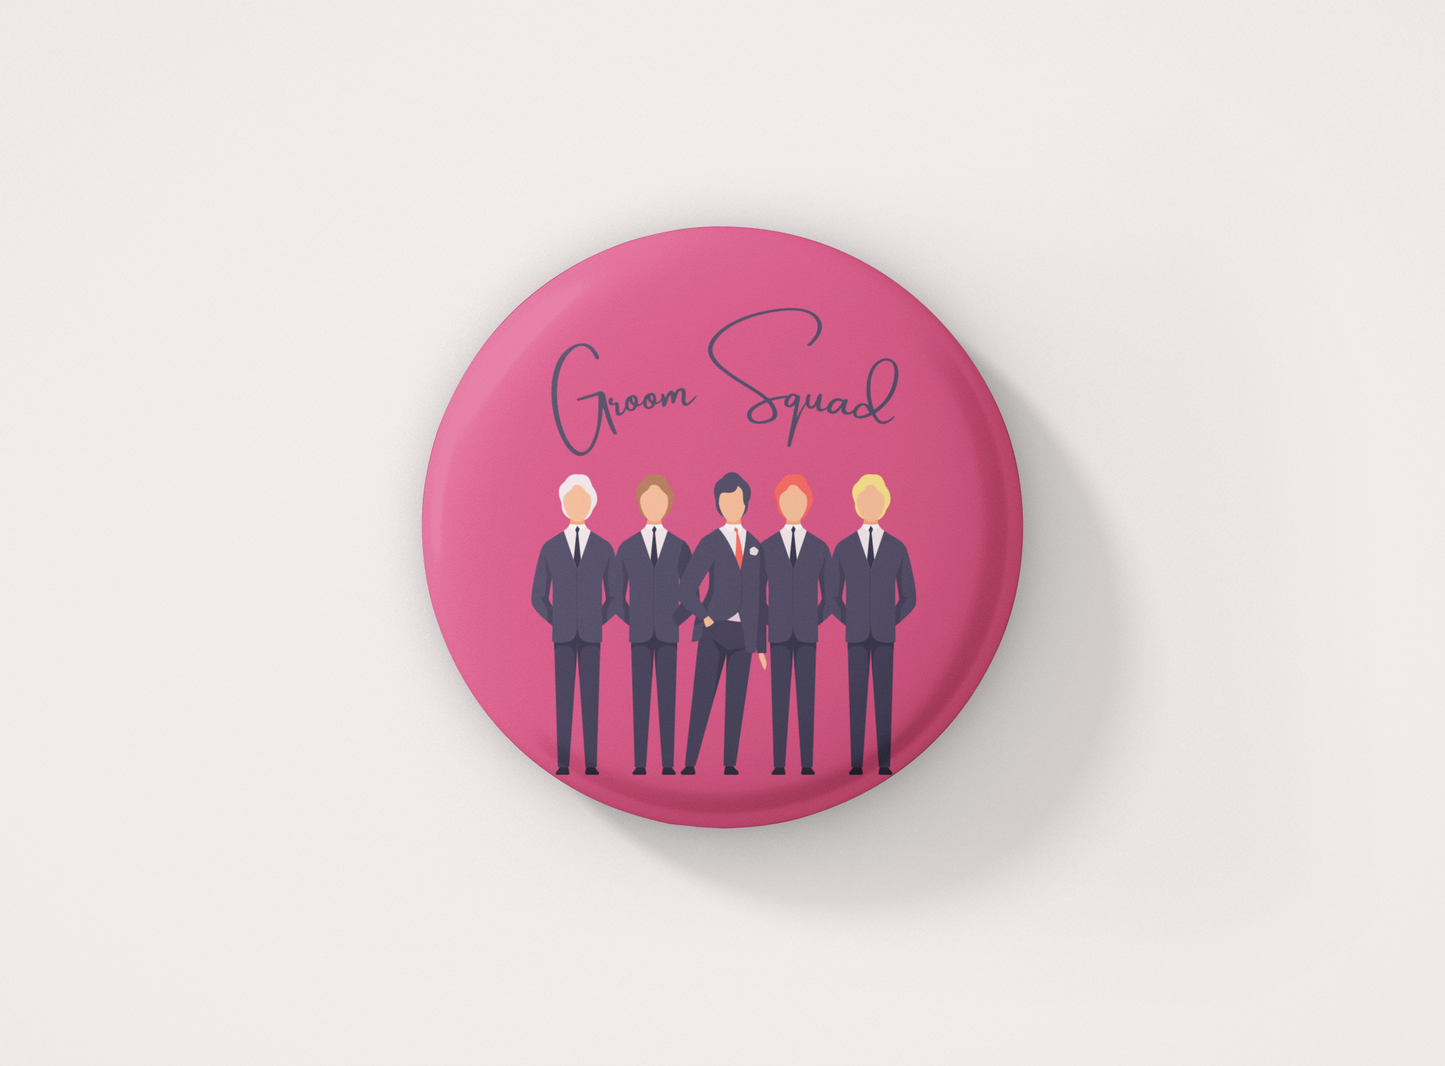 Groom Squad! Pin Button Badge - Pack of 1